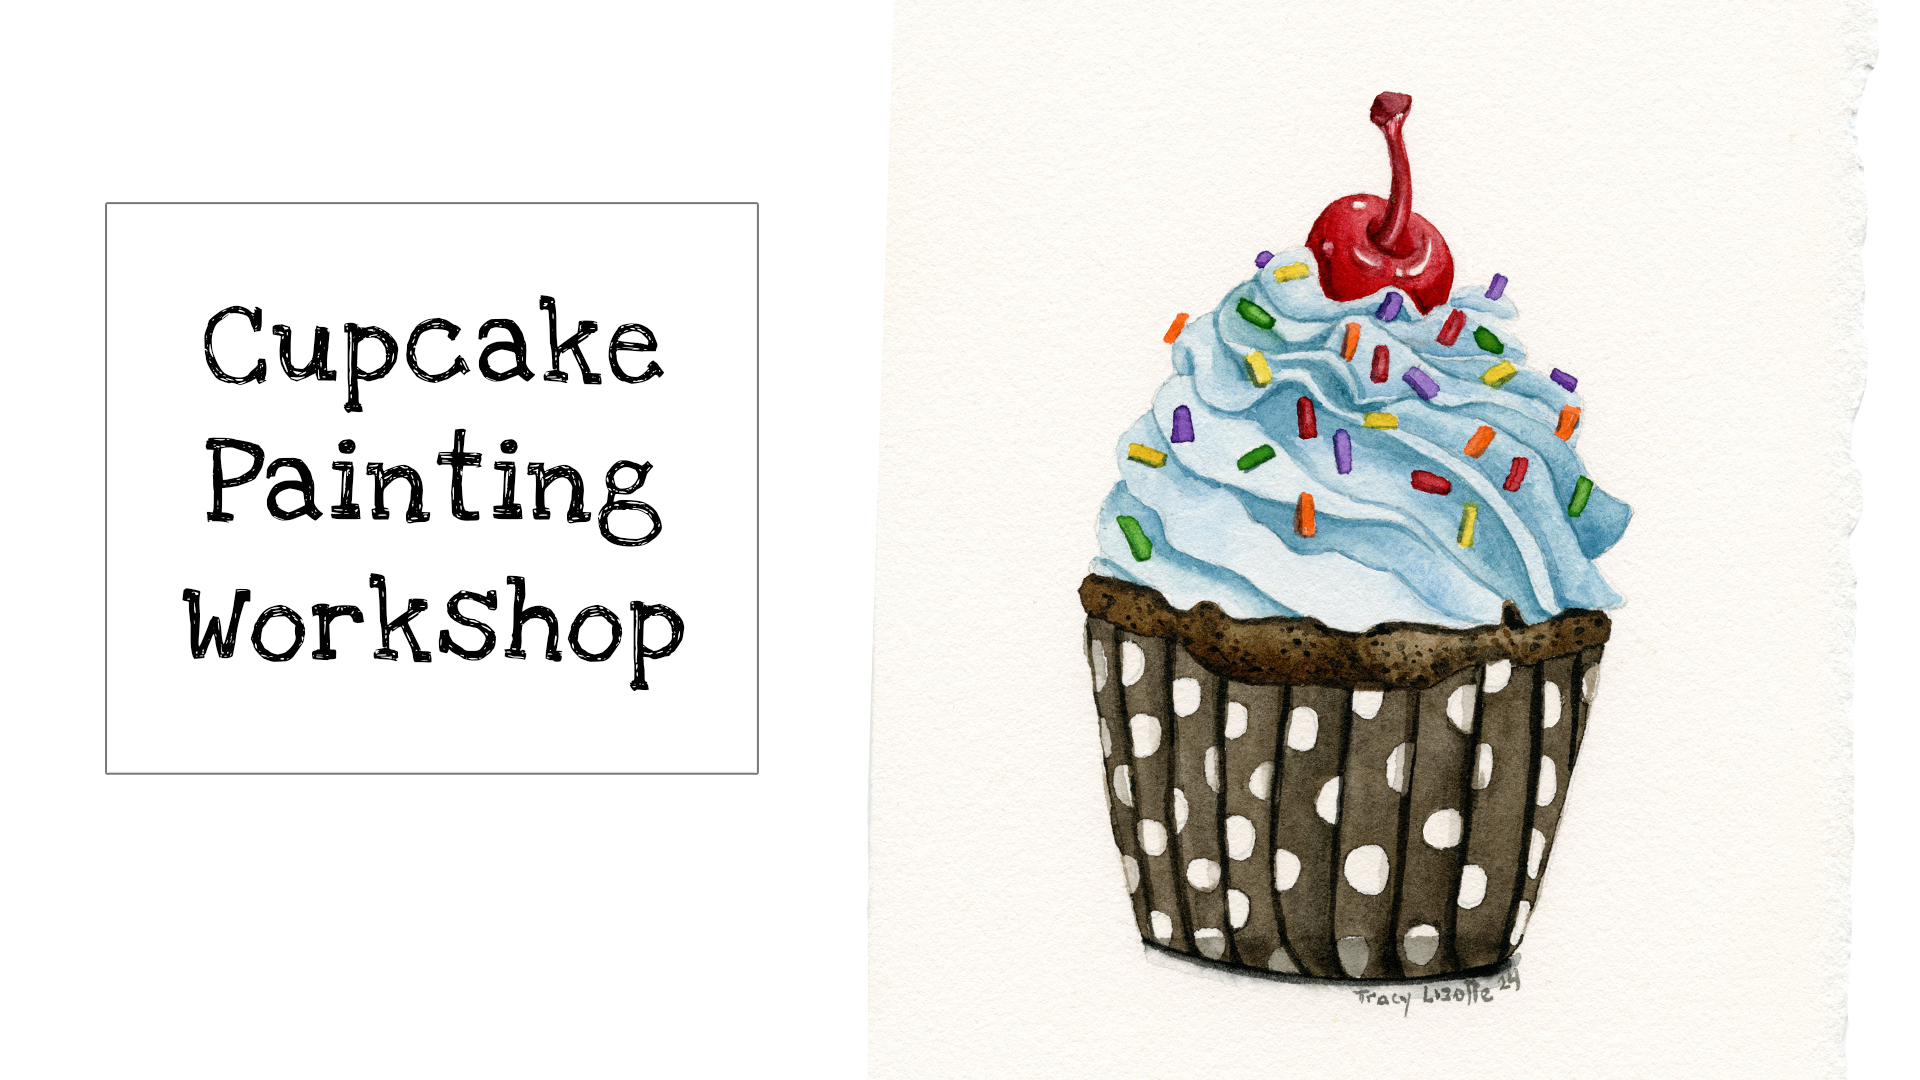 How to Paint a Cupcake with Watercolors